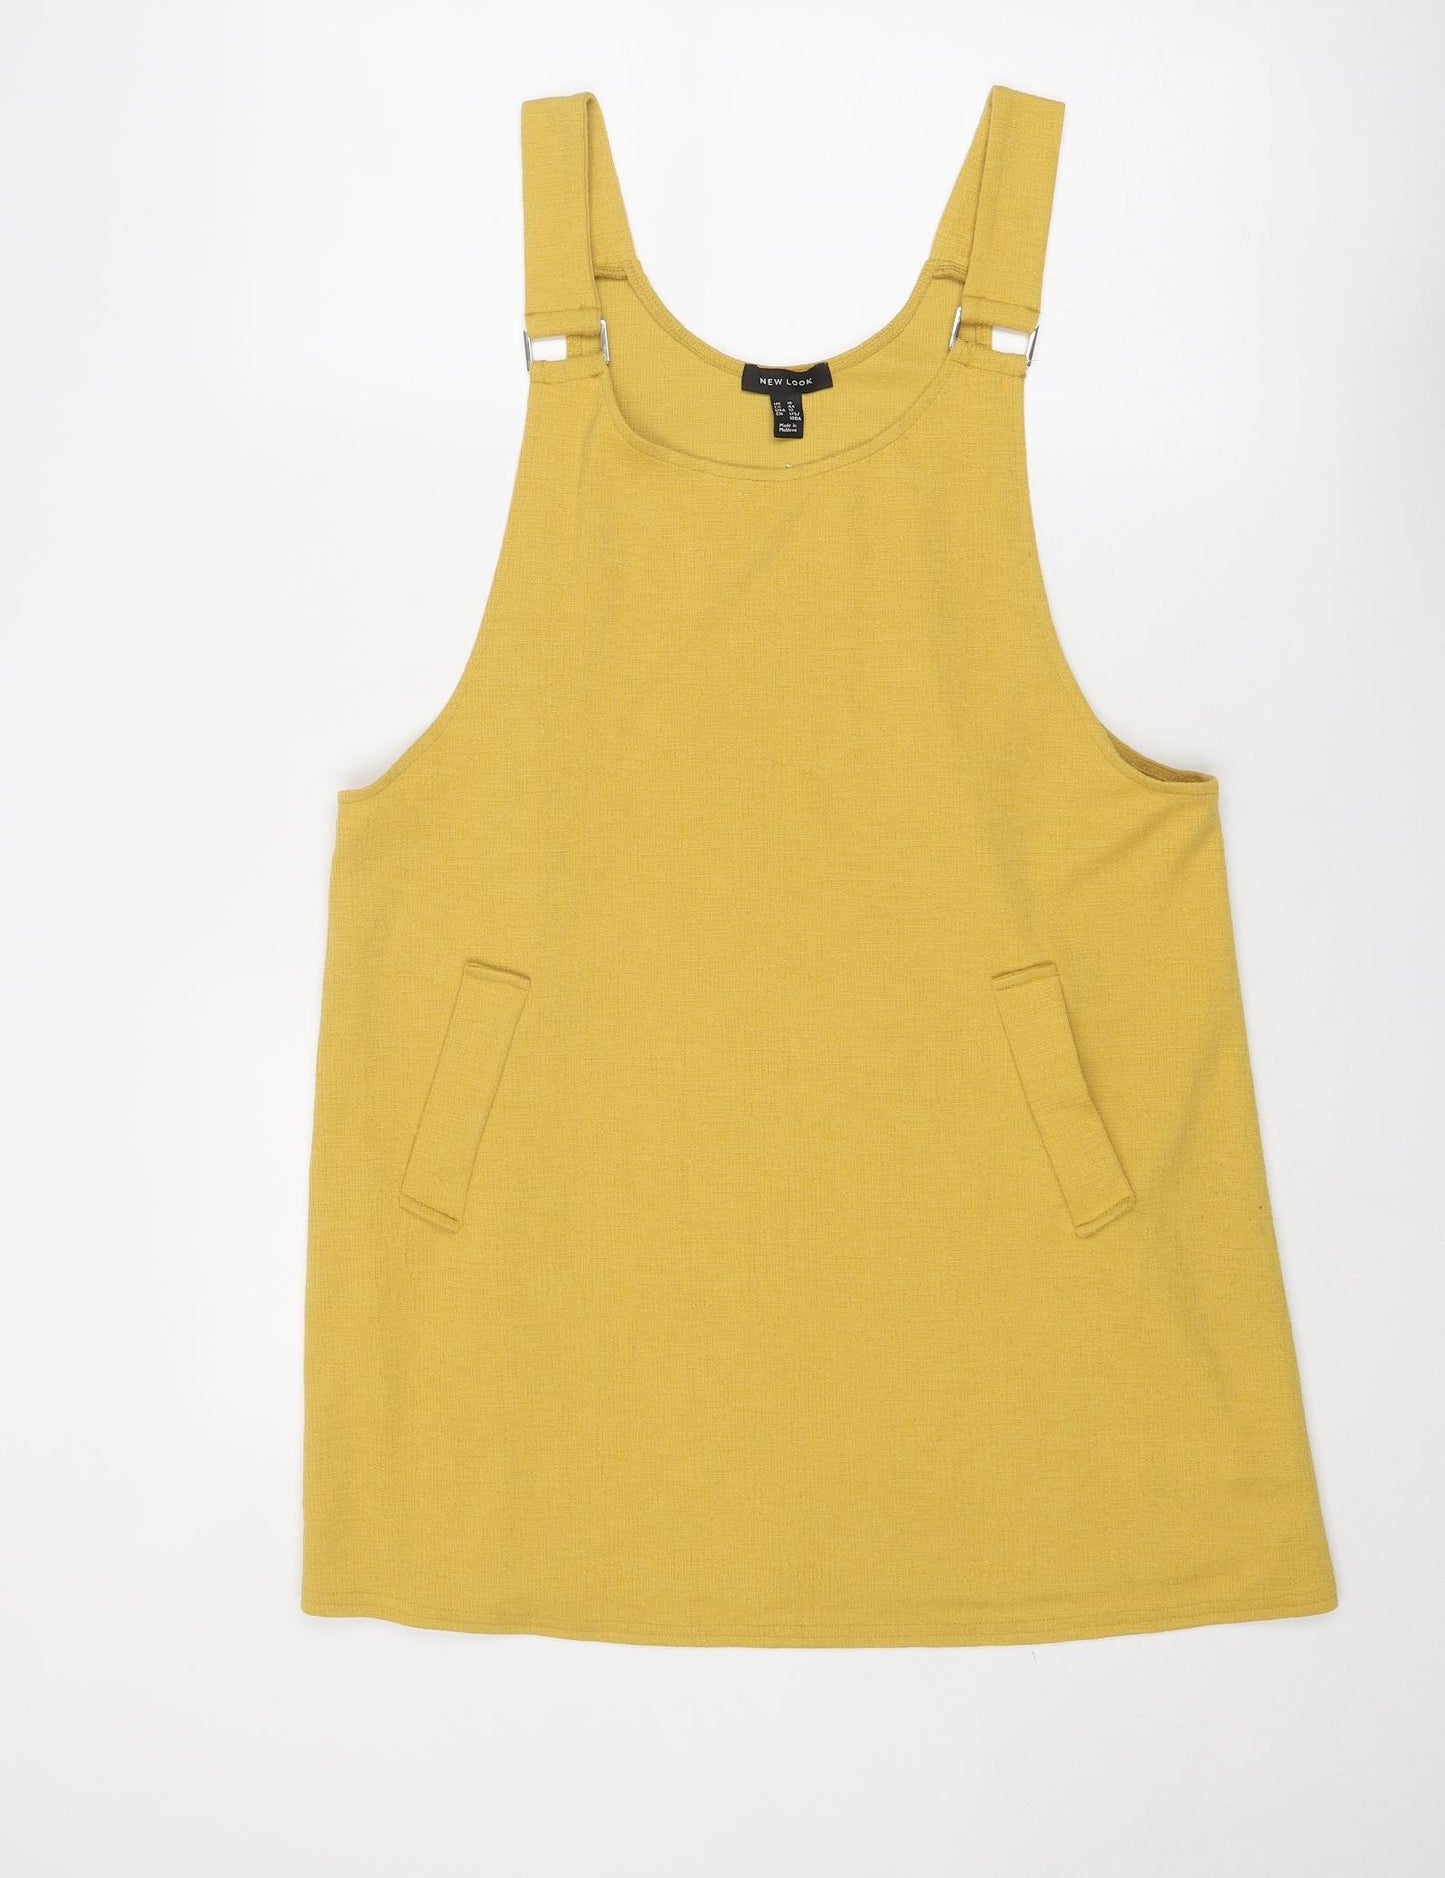 New Look Womens Yellow Polyester Pinafore/Dungaree Dress Size 16 Round Neck Pullover